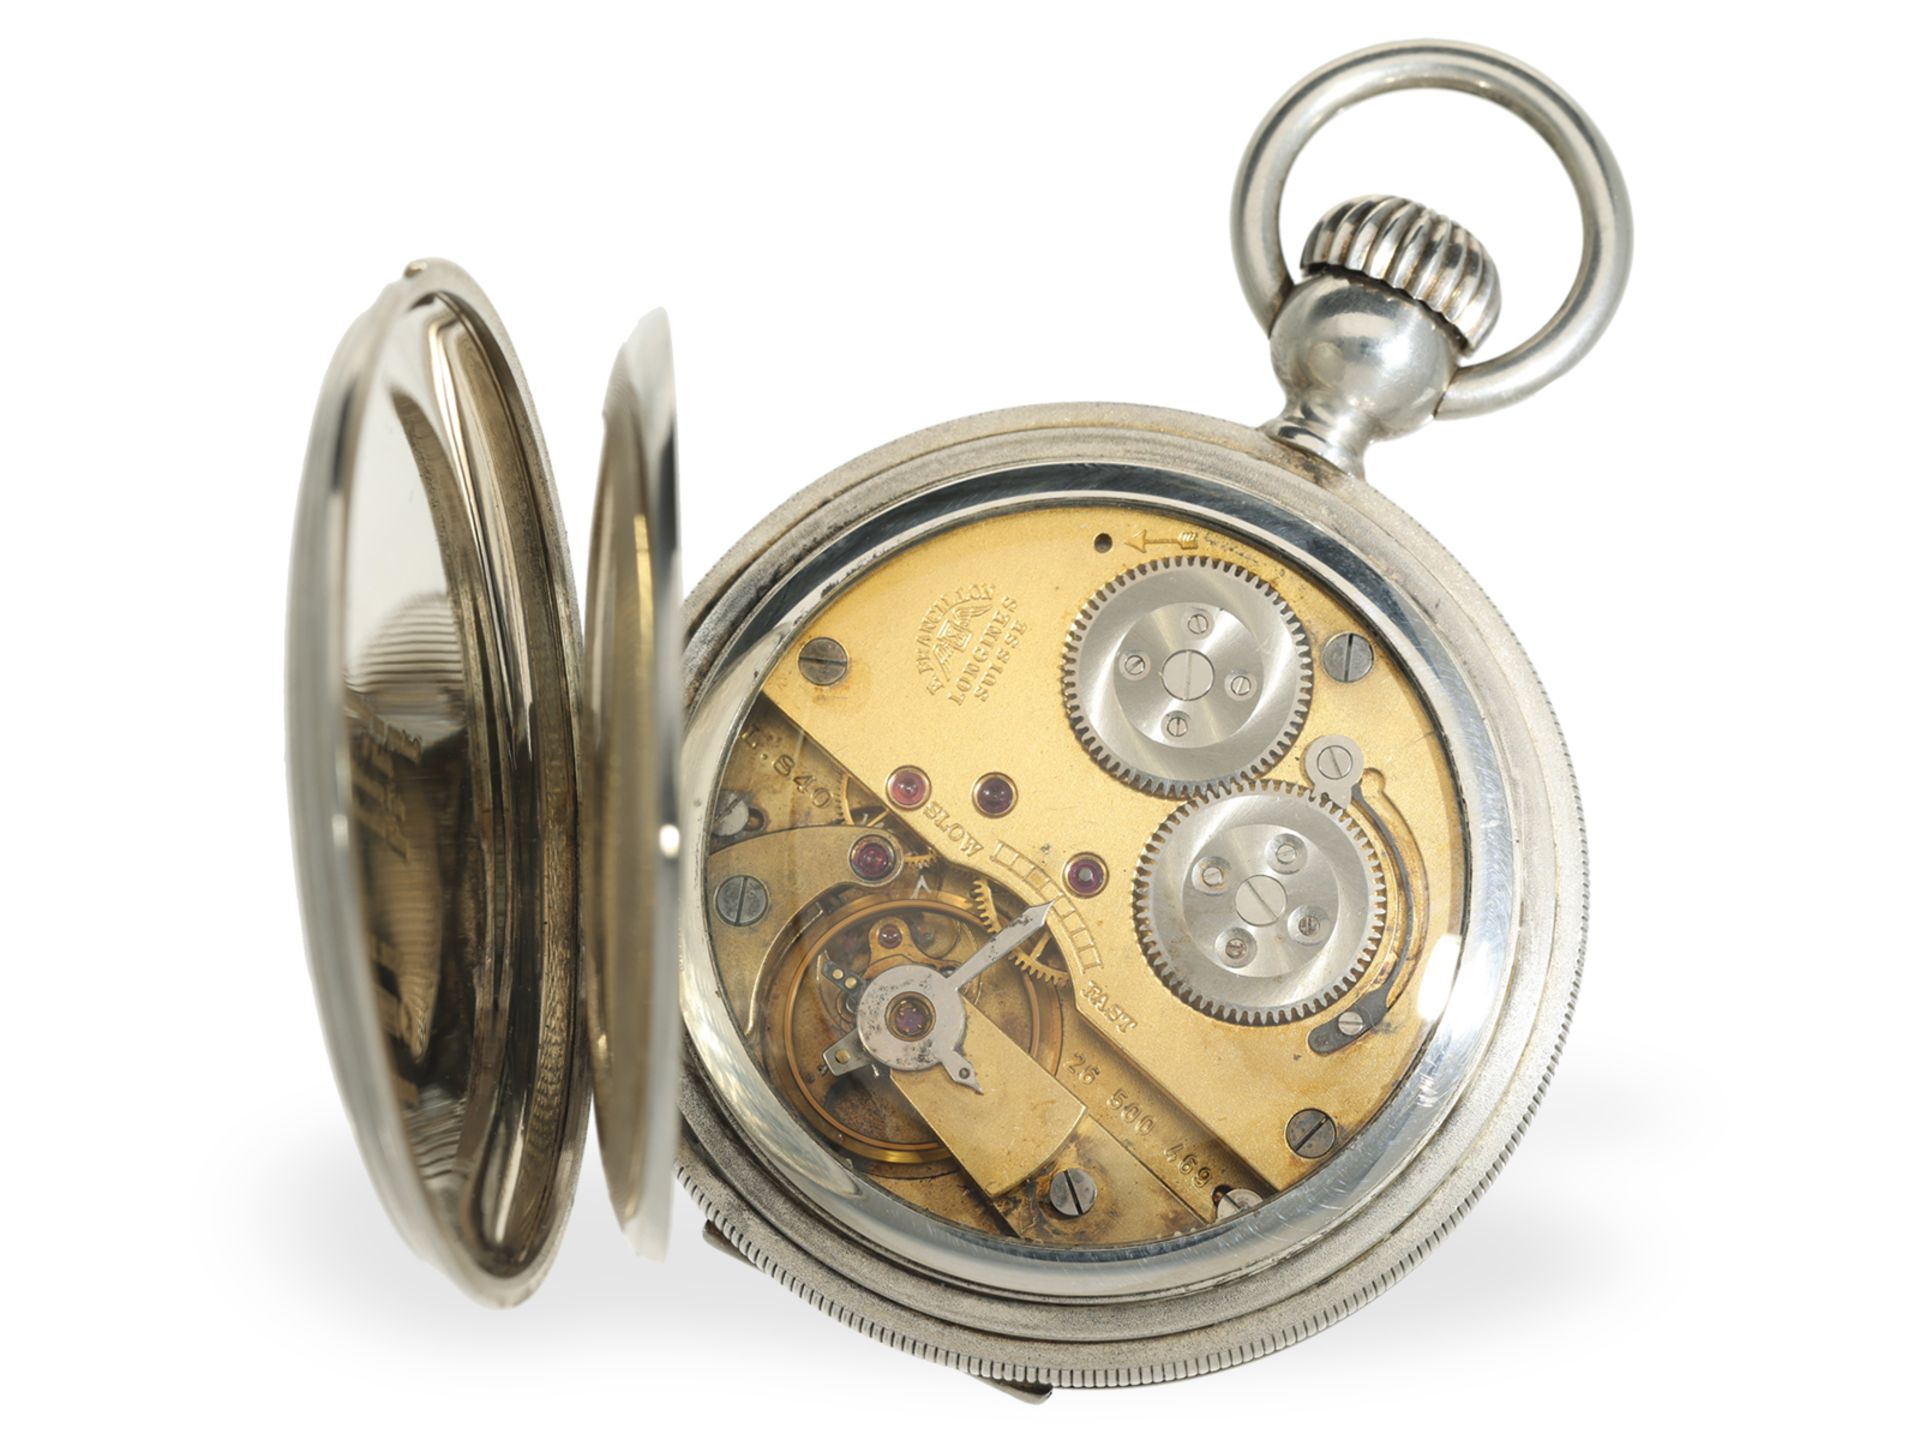 Pocket watch: rare, limited Longines Ernest Francillon 125th "1867" Ref. 840.8022, 399/1000 - Image 2 of 7